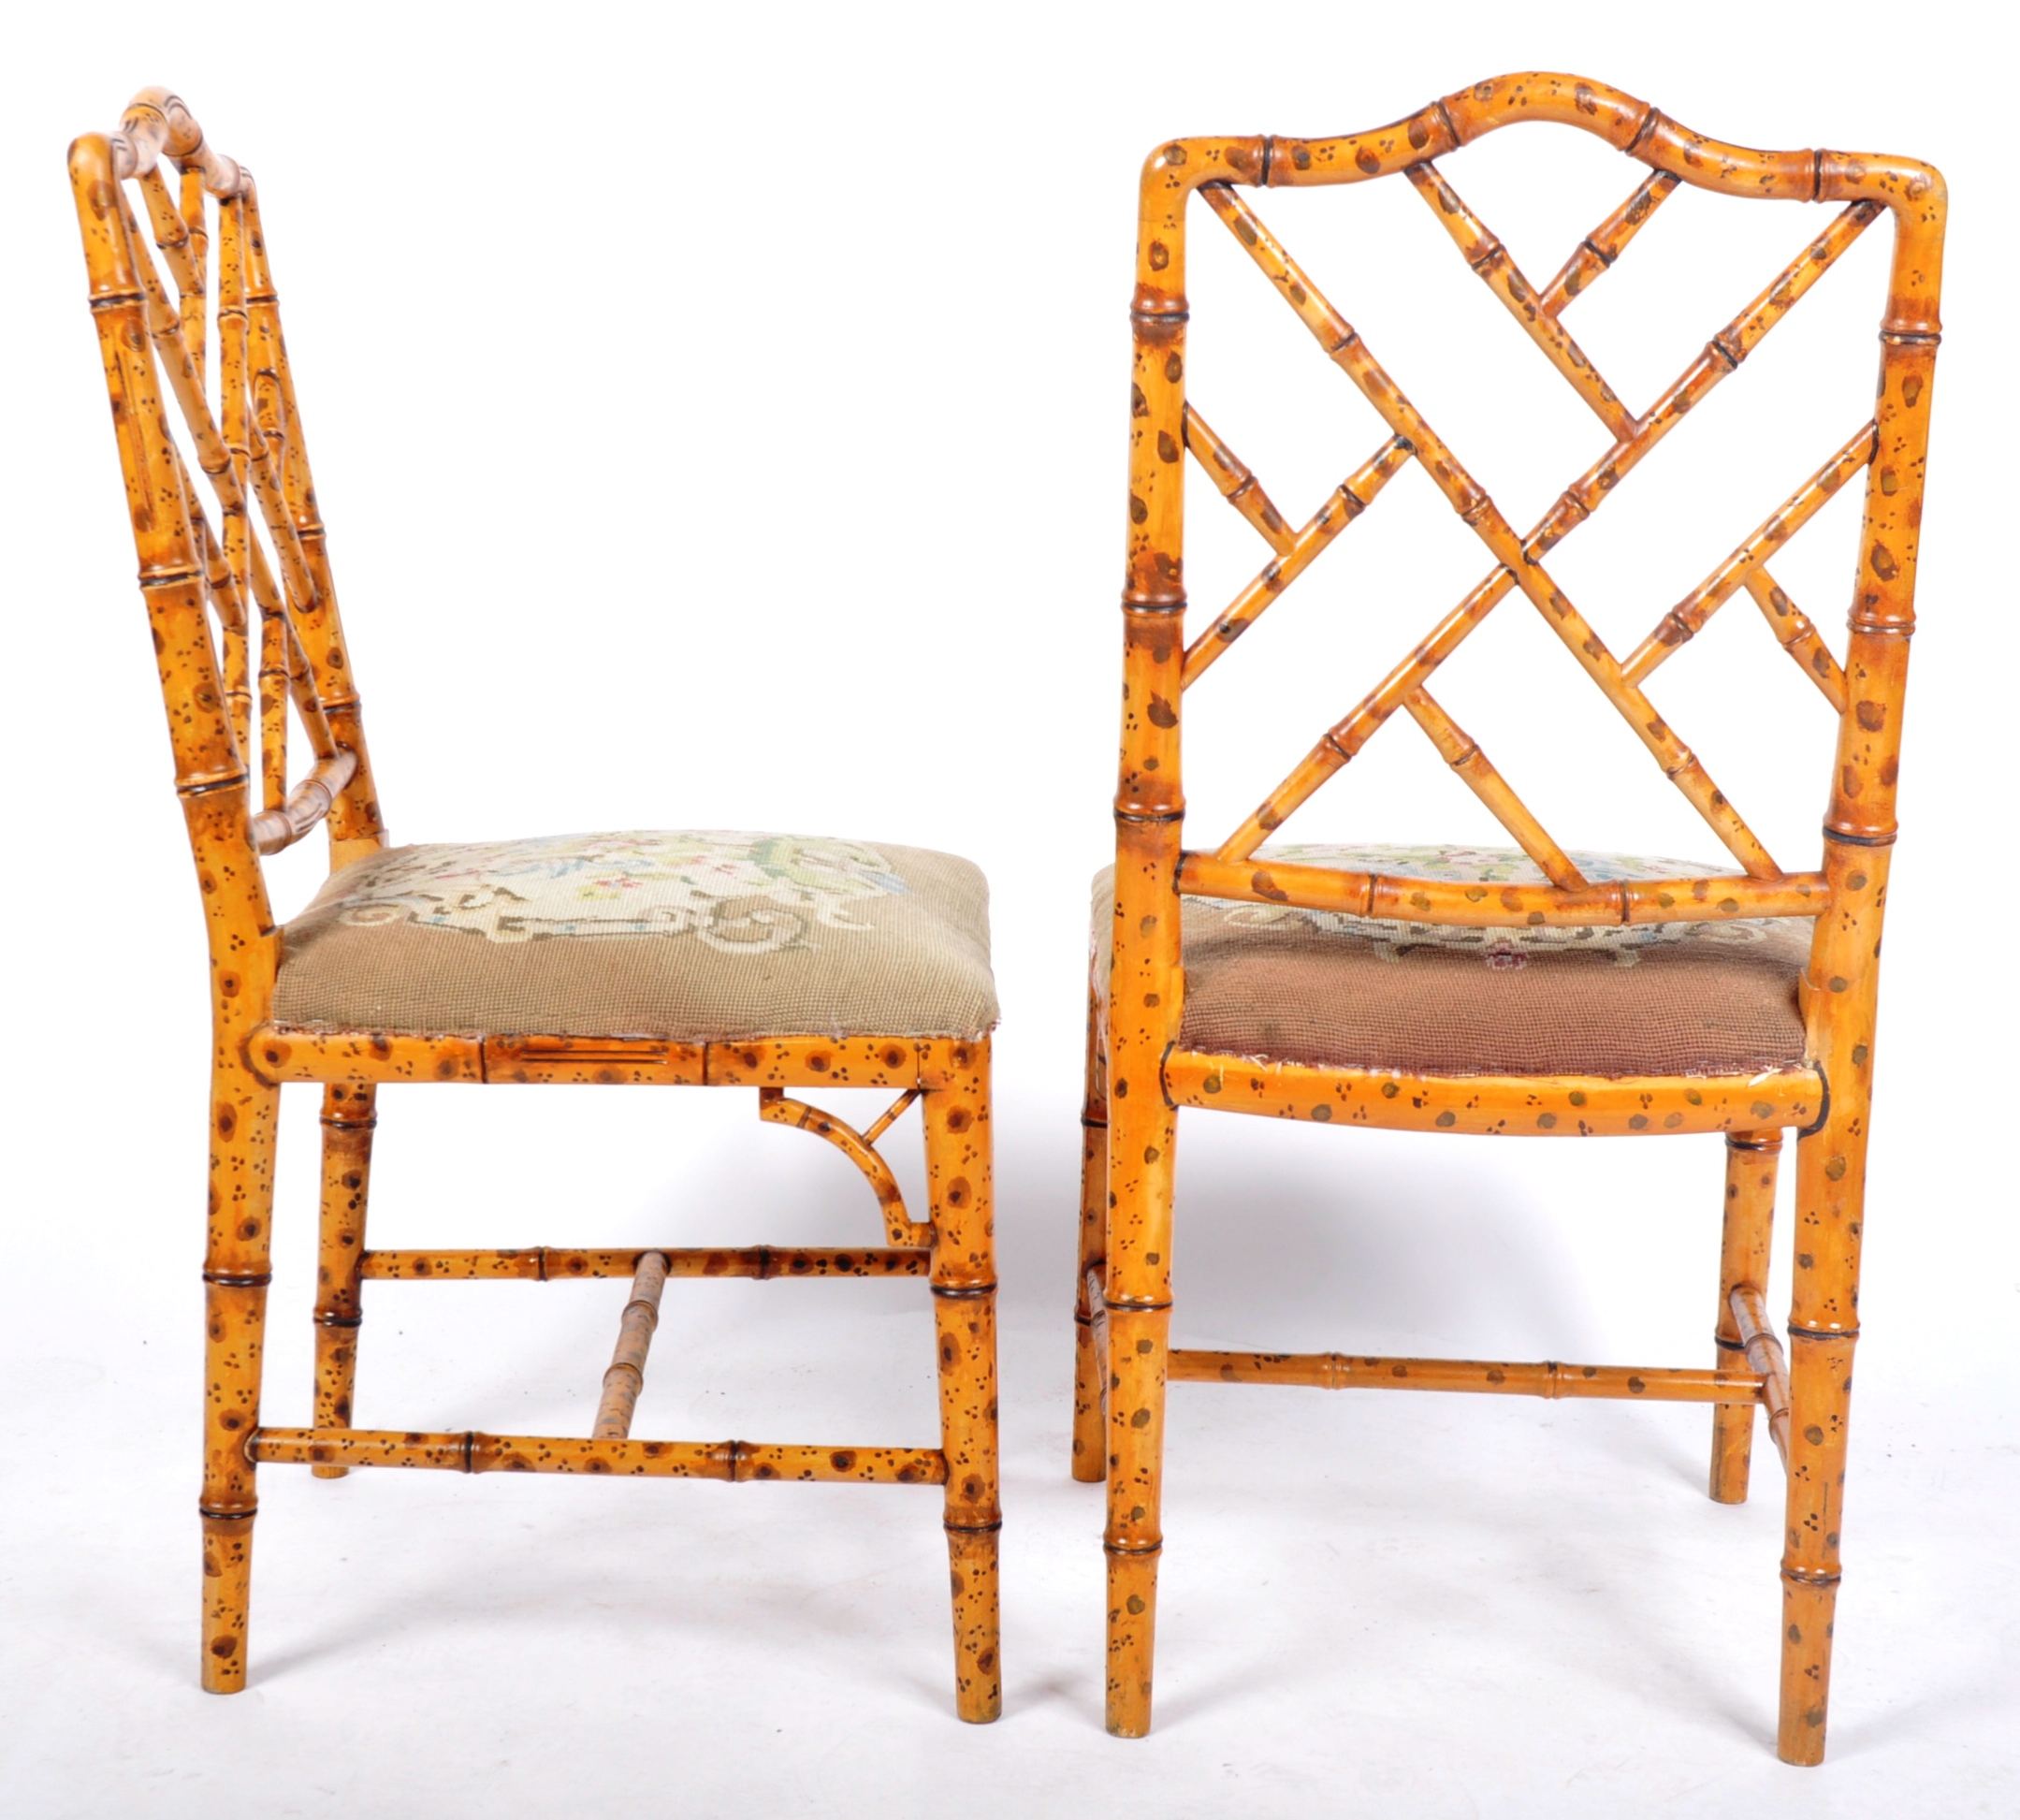 MATCHING PAIR OF 18TH CENTURY STYLE FAUX BAMBOO CHAIRS - Image 6 of 7